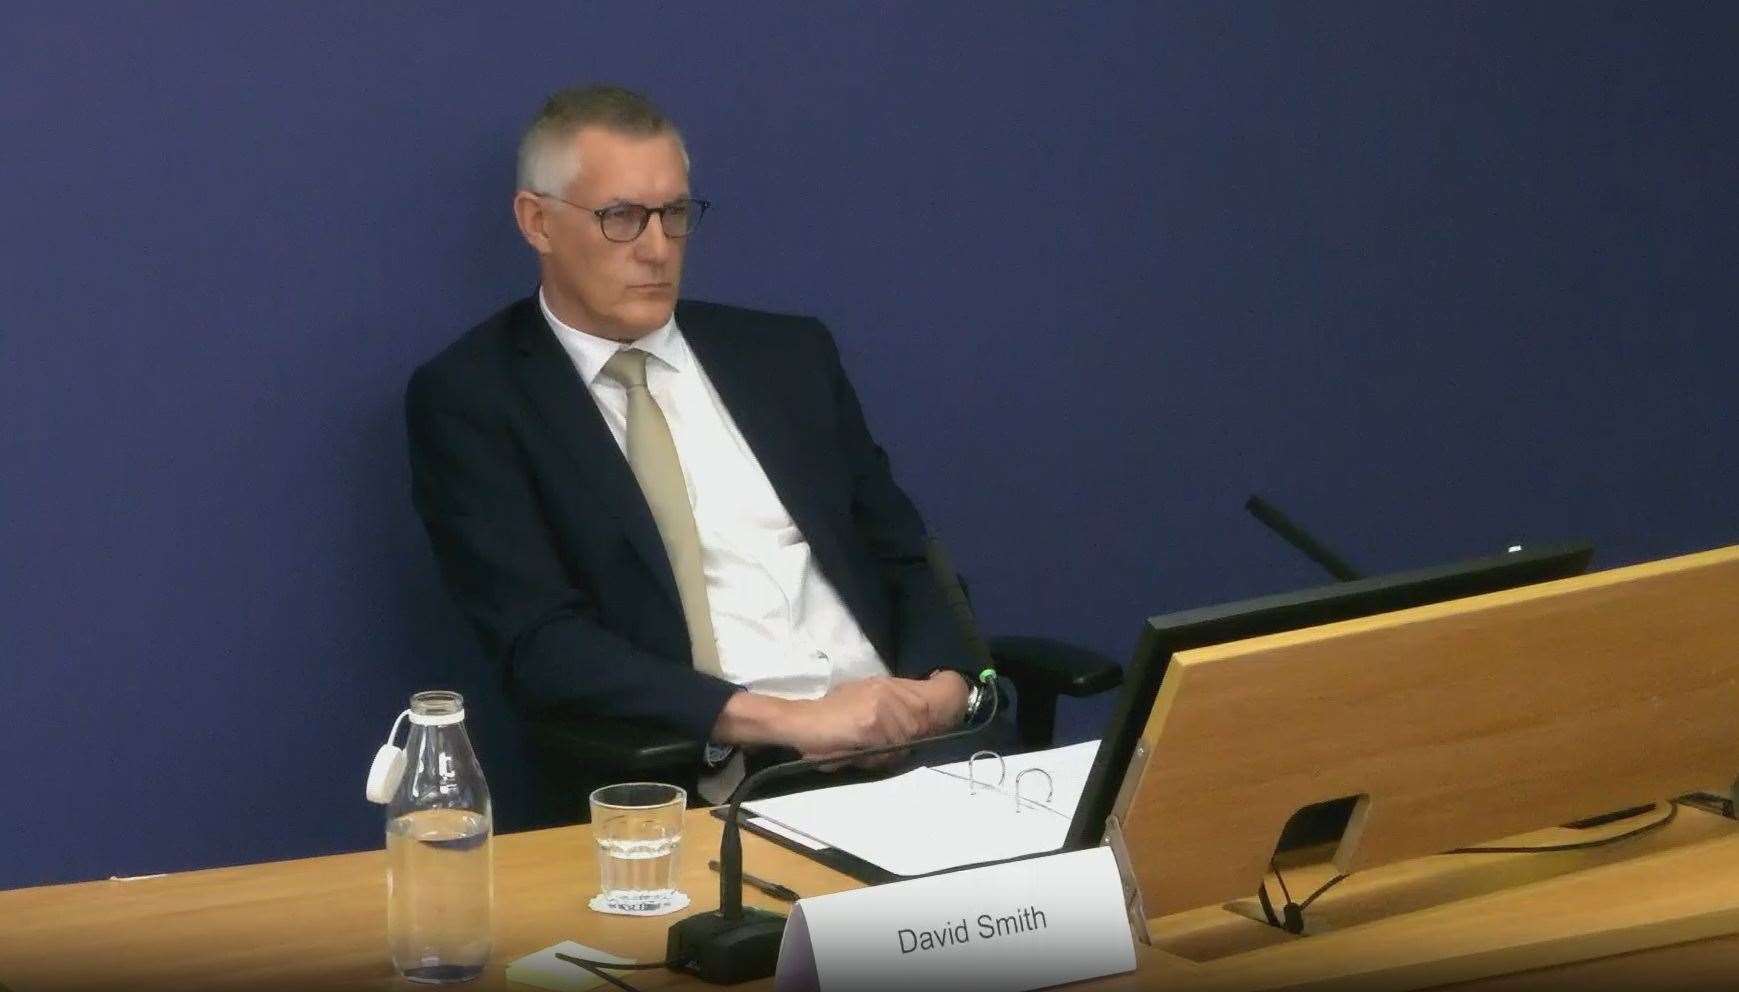 Former Post Office managing director David Smith giving evidence to phase four of the inquiry at Aldwych House (Post Office Horizon IT Inquiry/PA)